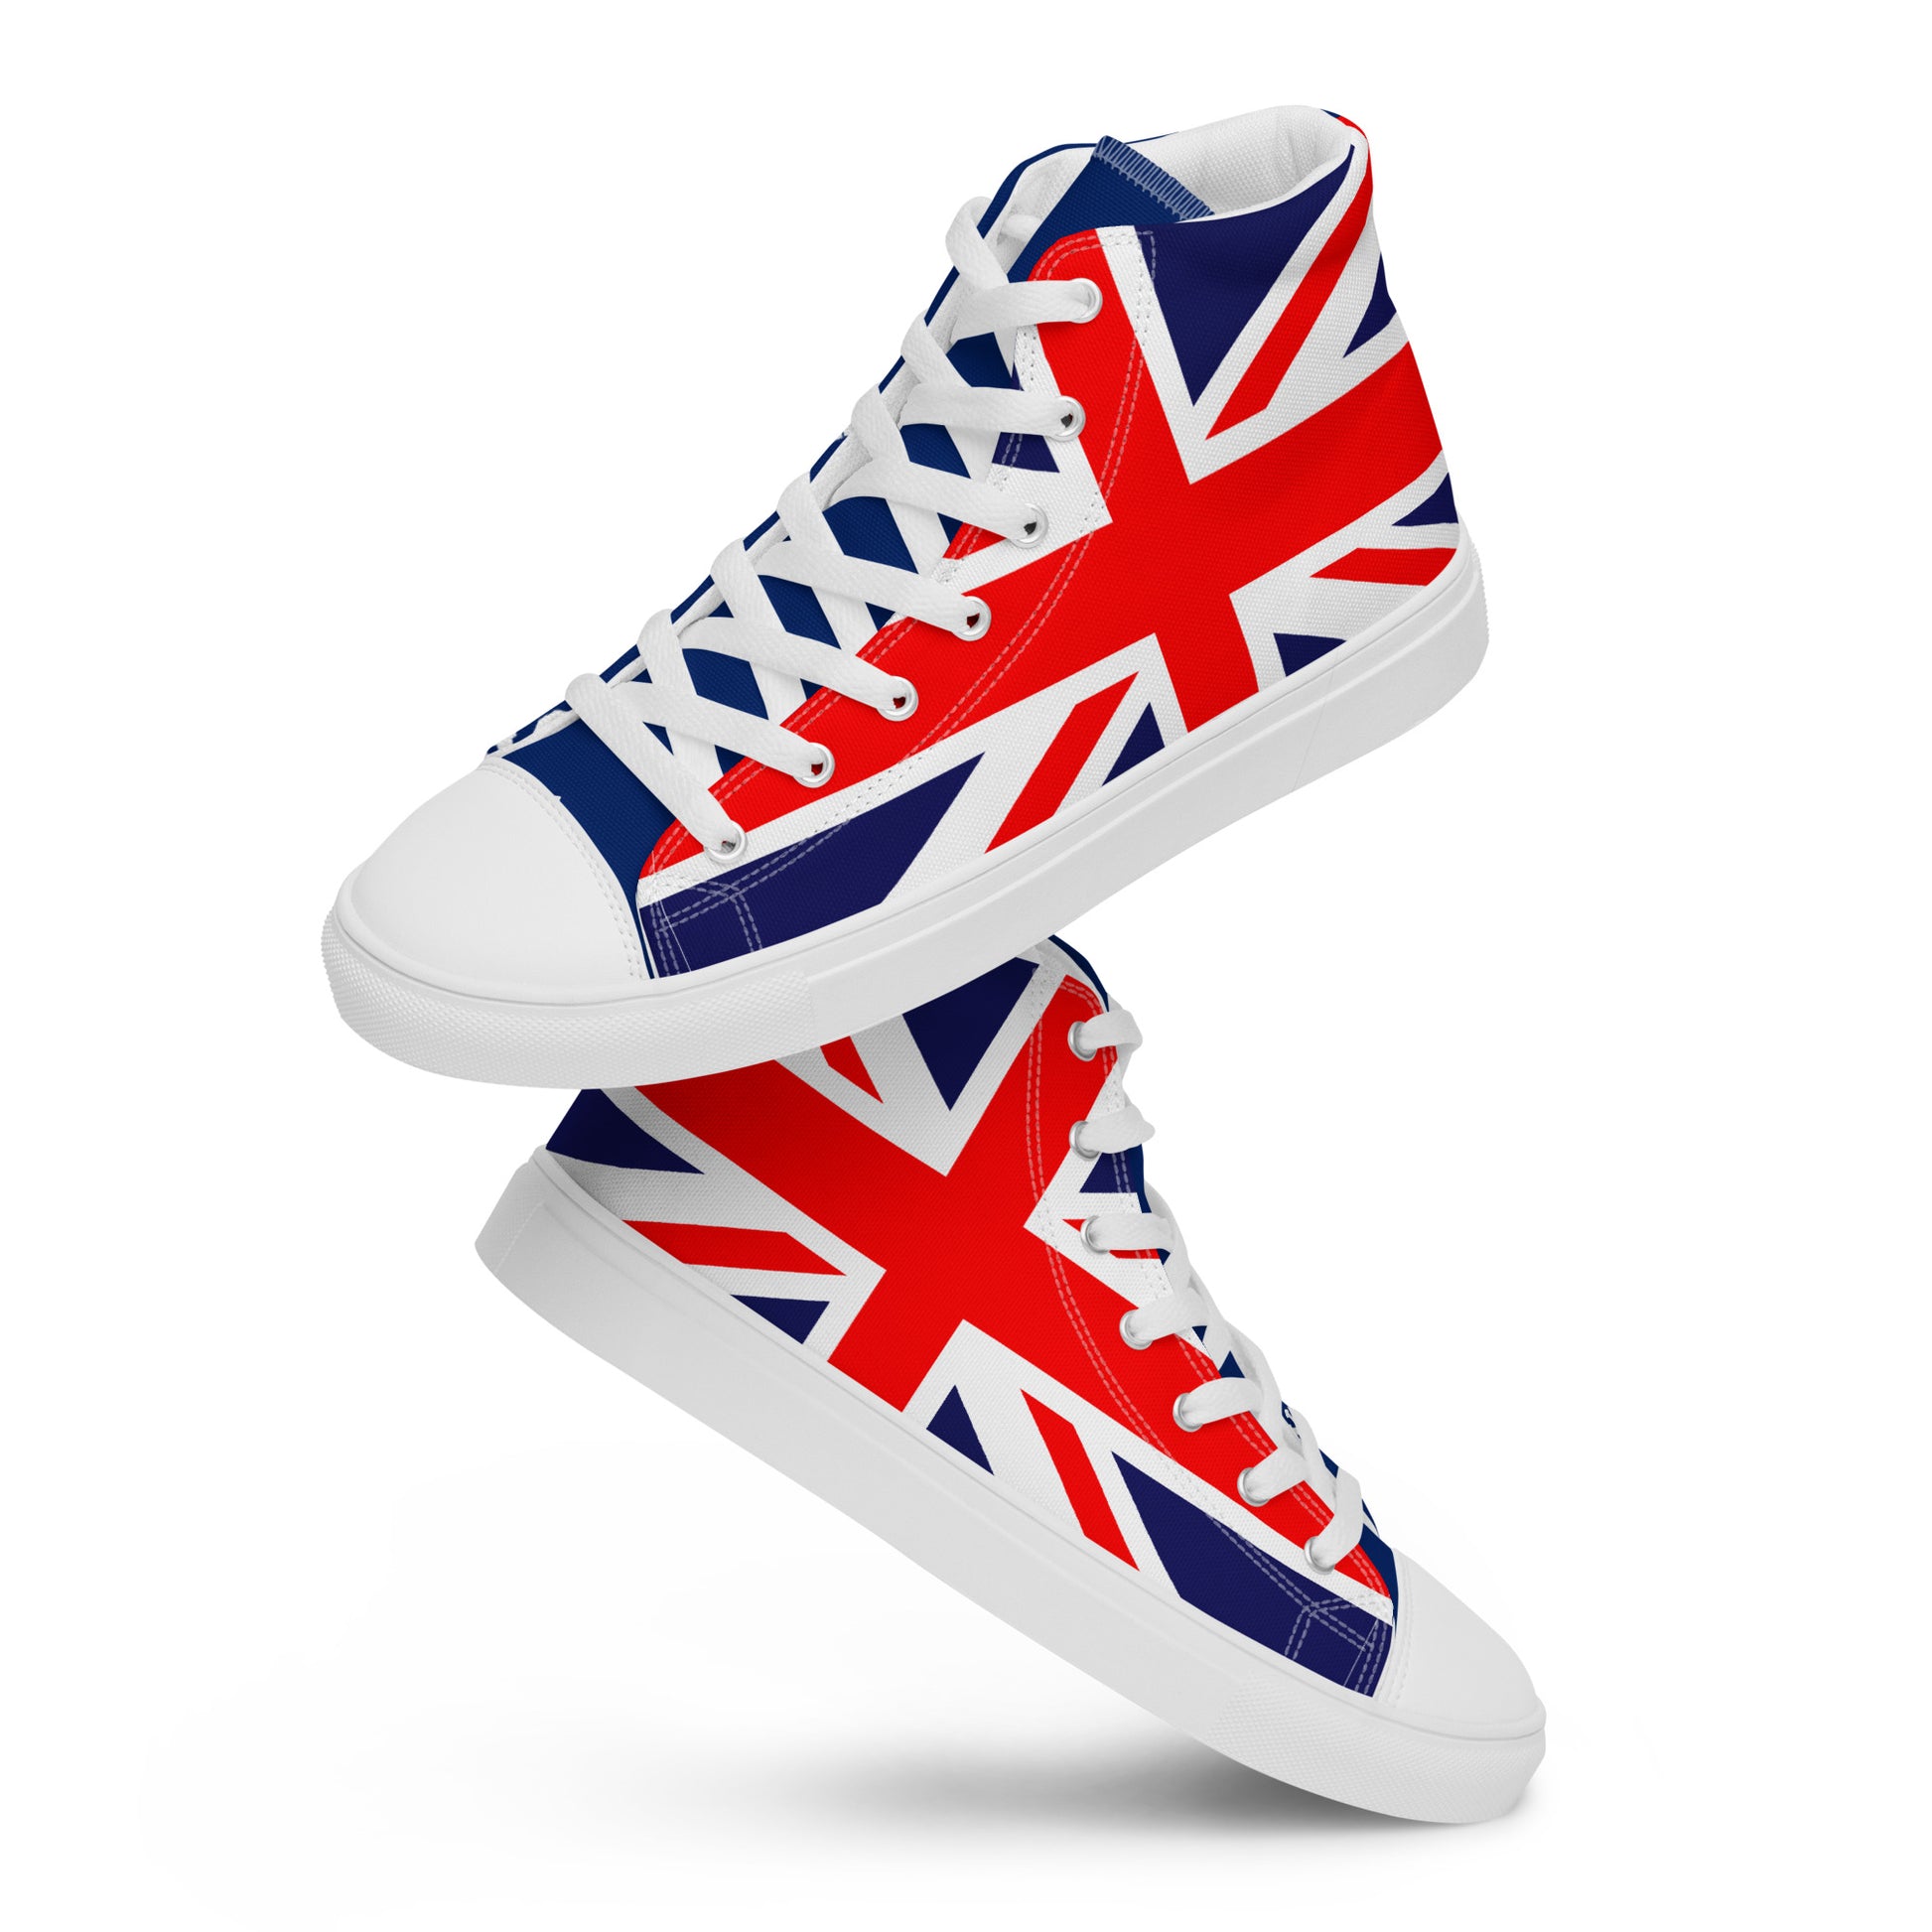 High Top Sneakers For Men With Union Jack Print